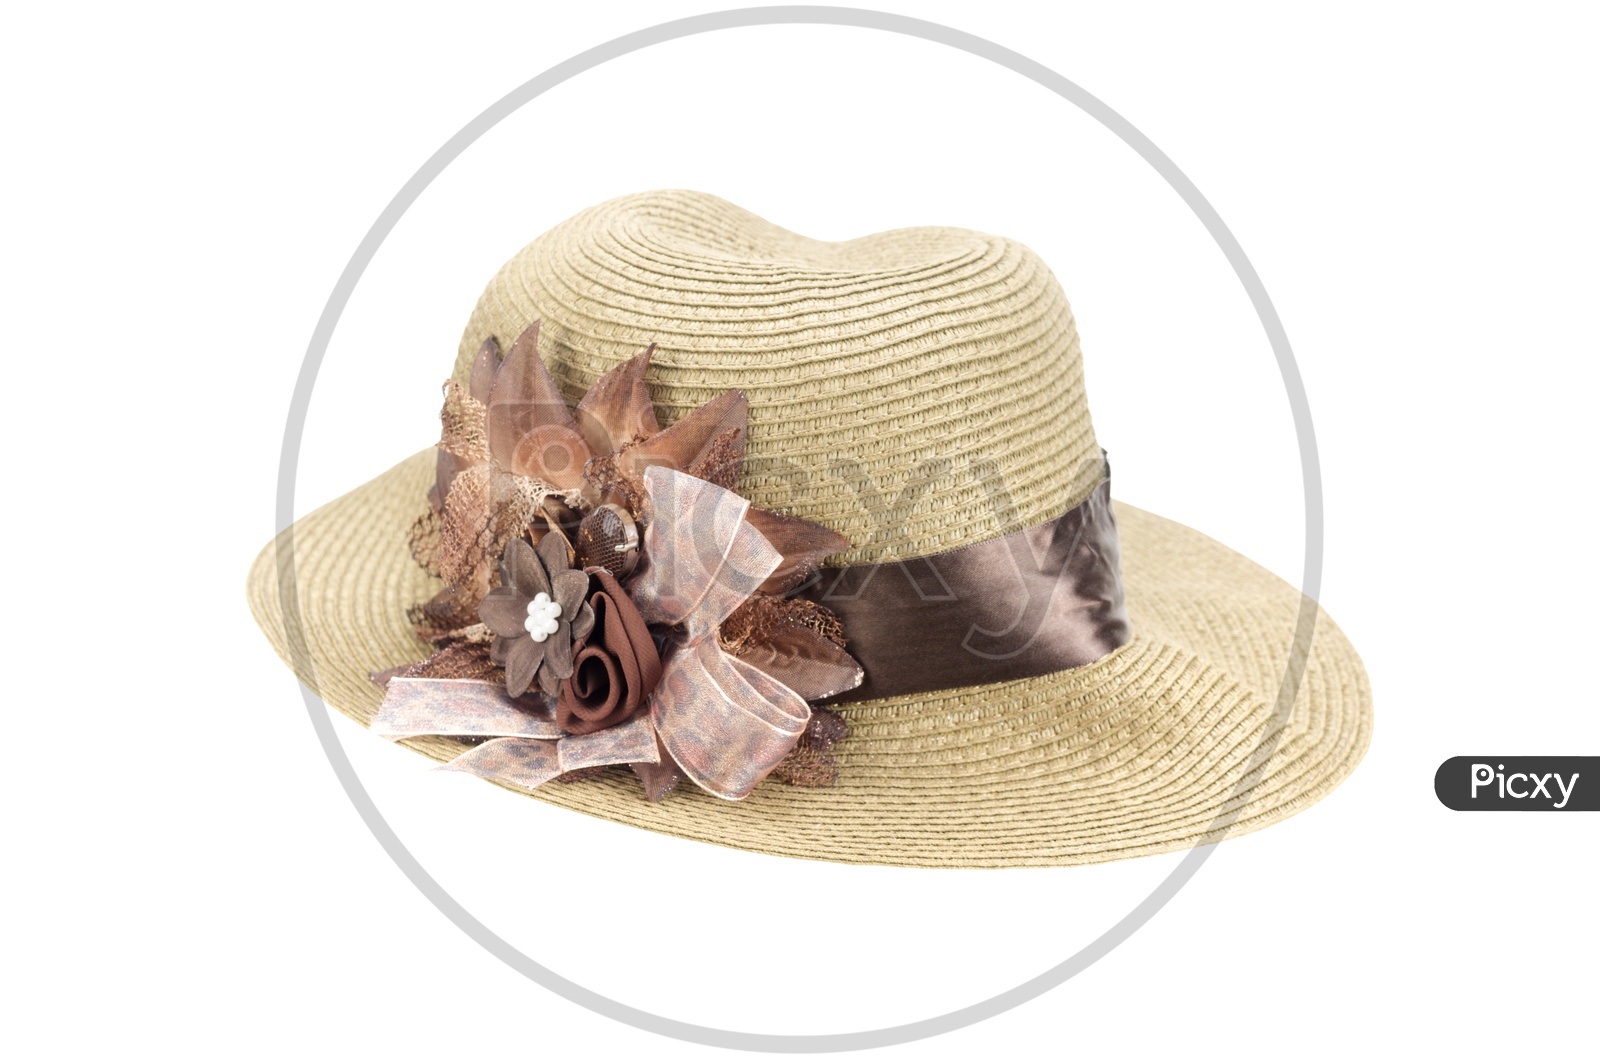 Beach Hat With Flowers Decorated On an Isolated White Background